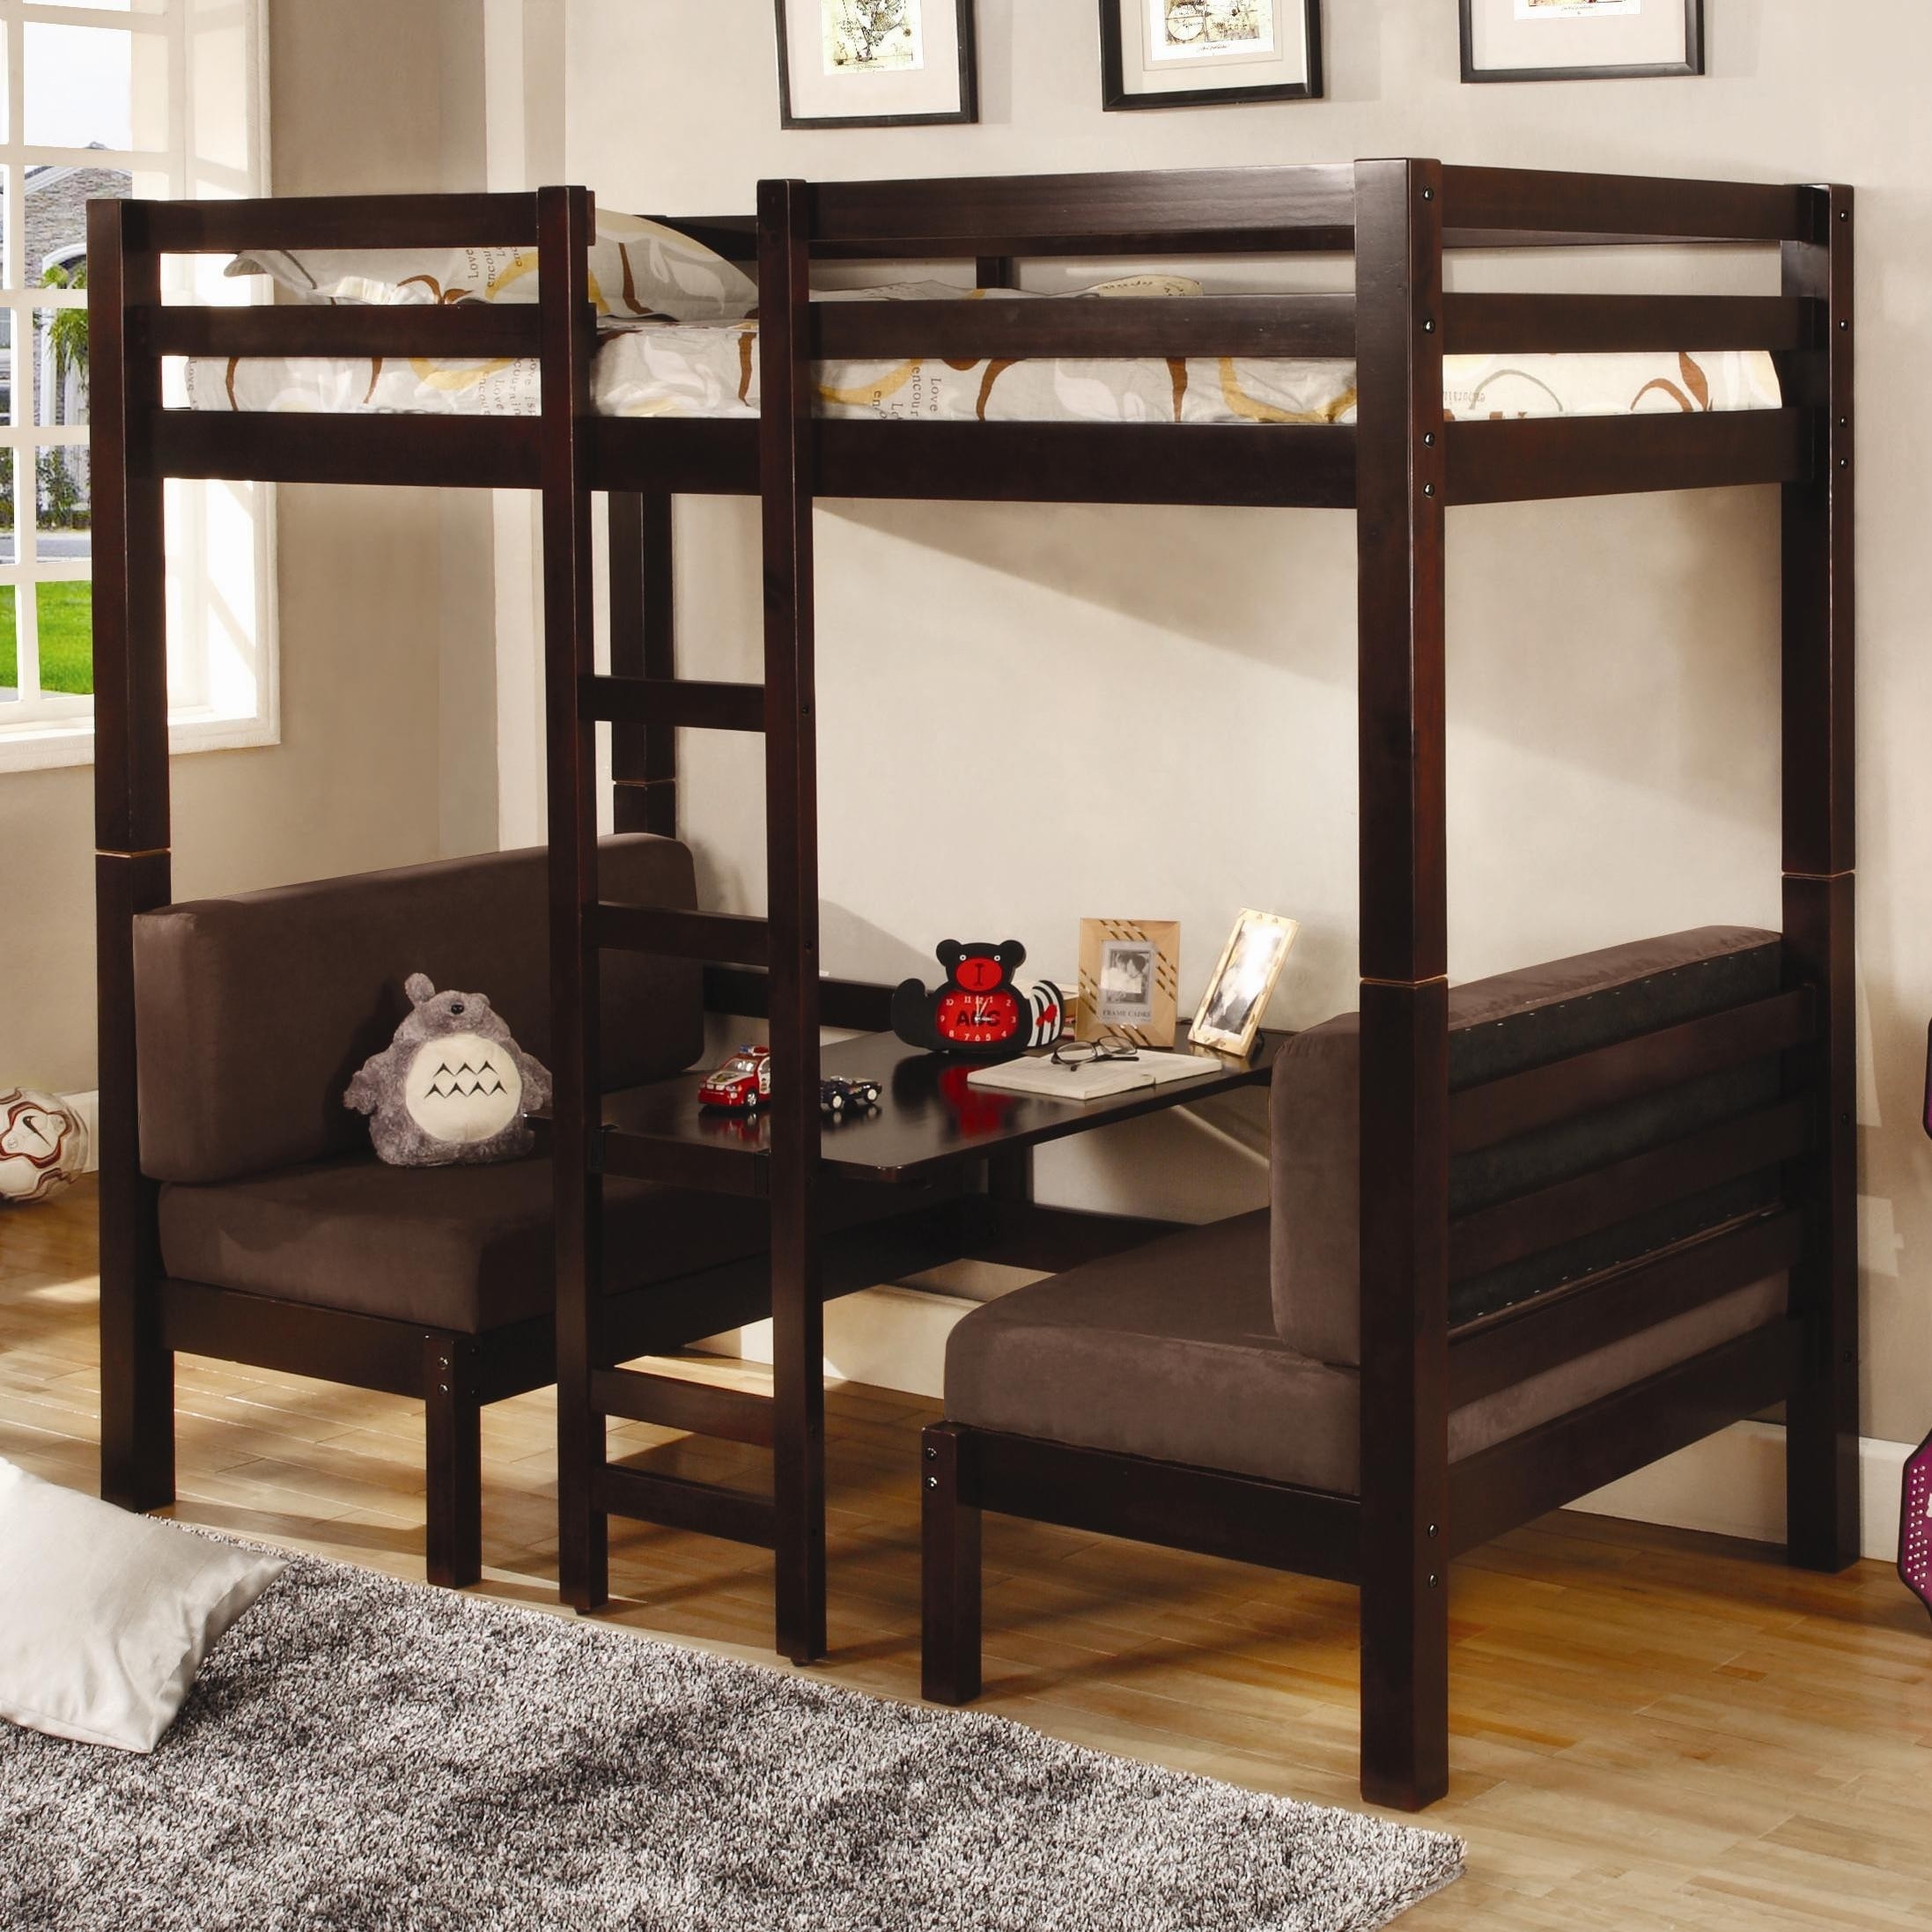 Loft bed with couch